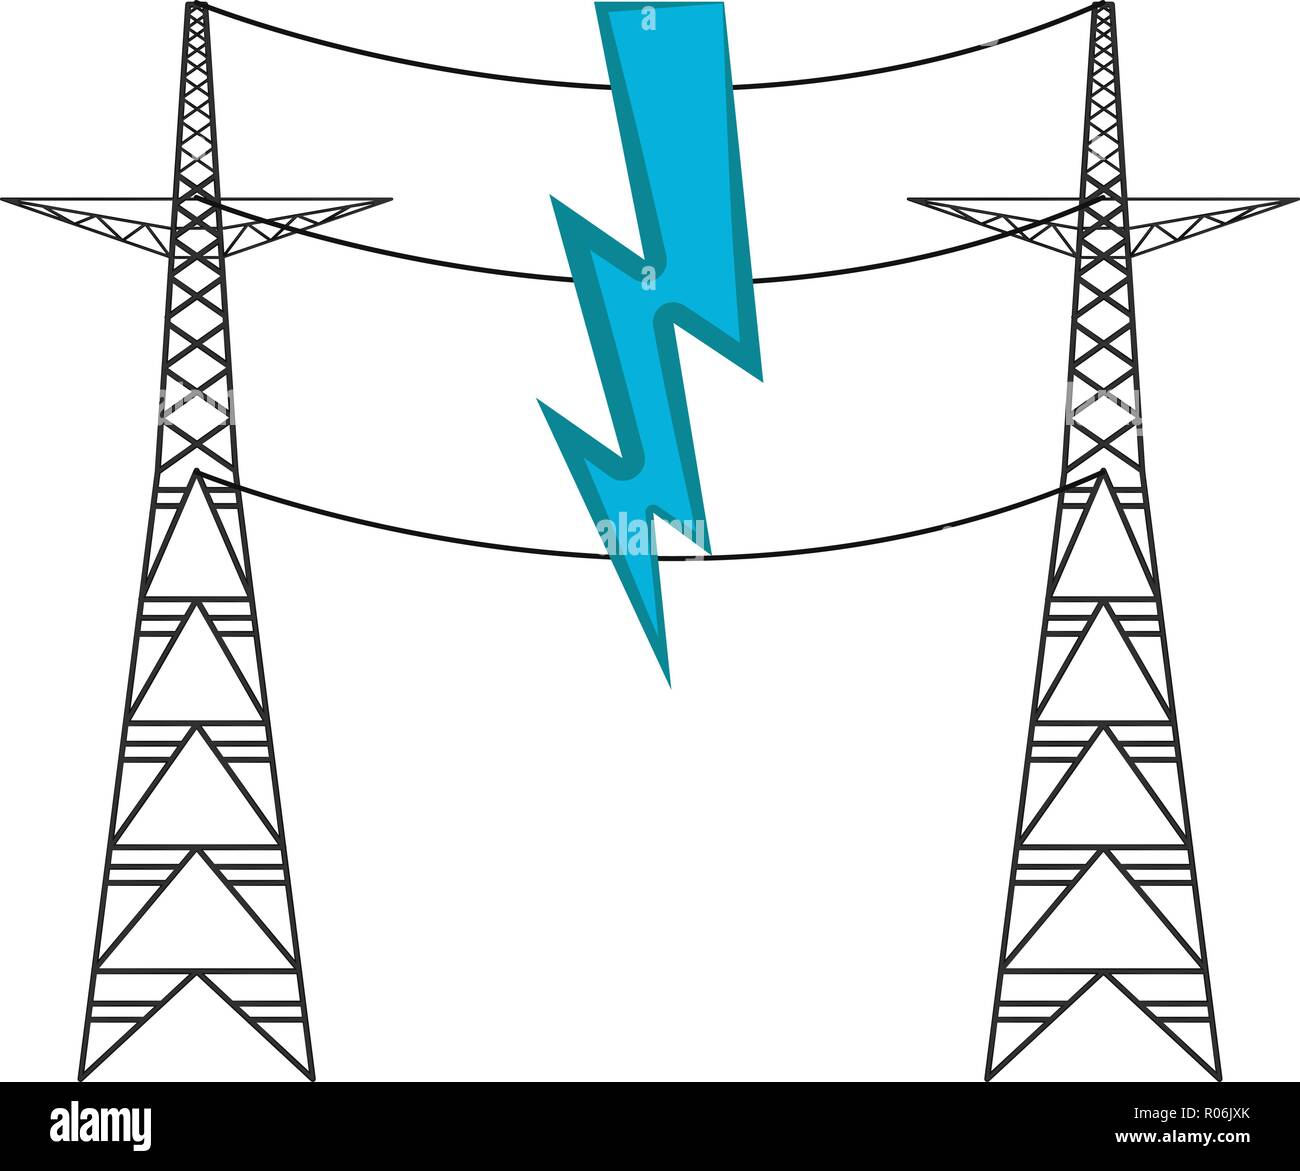 Pair of electrical towers Stock Vector